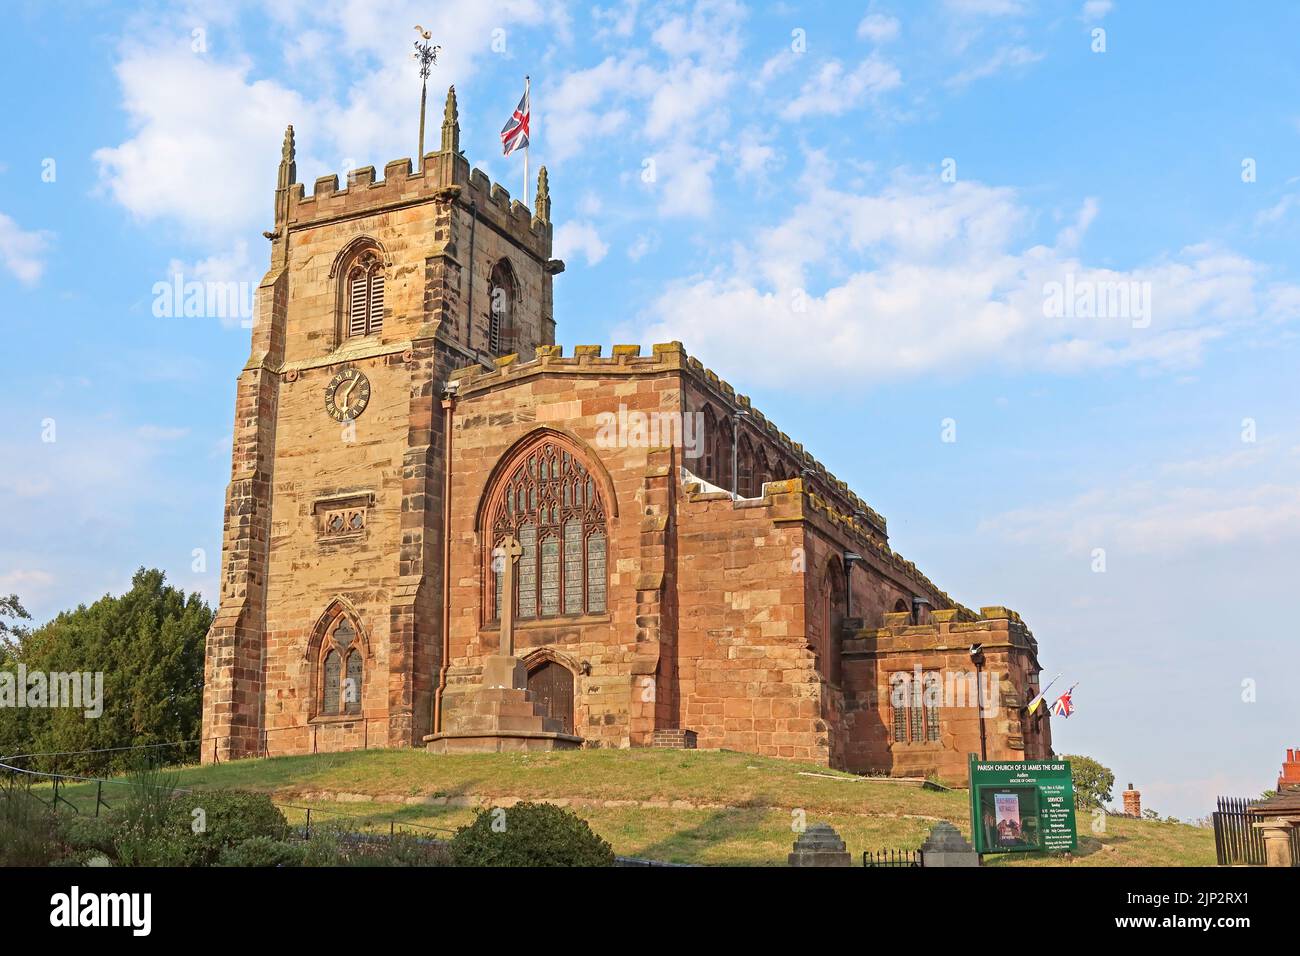 Parish Church of St James The Great, Audlem, A529, Audlem, Crewe, Cheshire, England, UK,  CW3 0AB Stock Photo